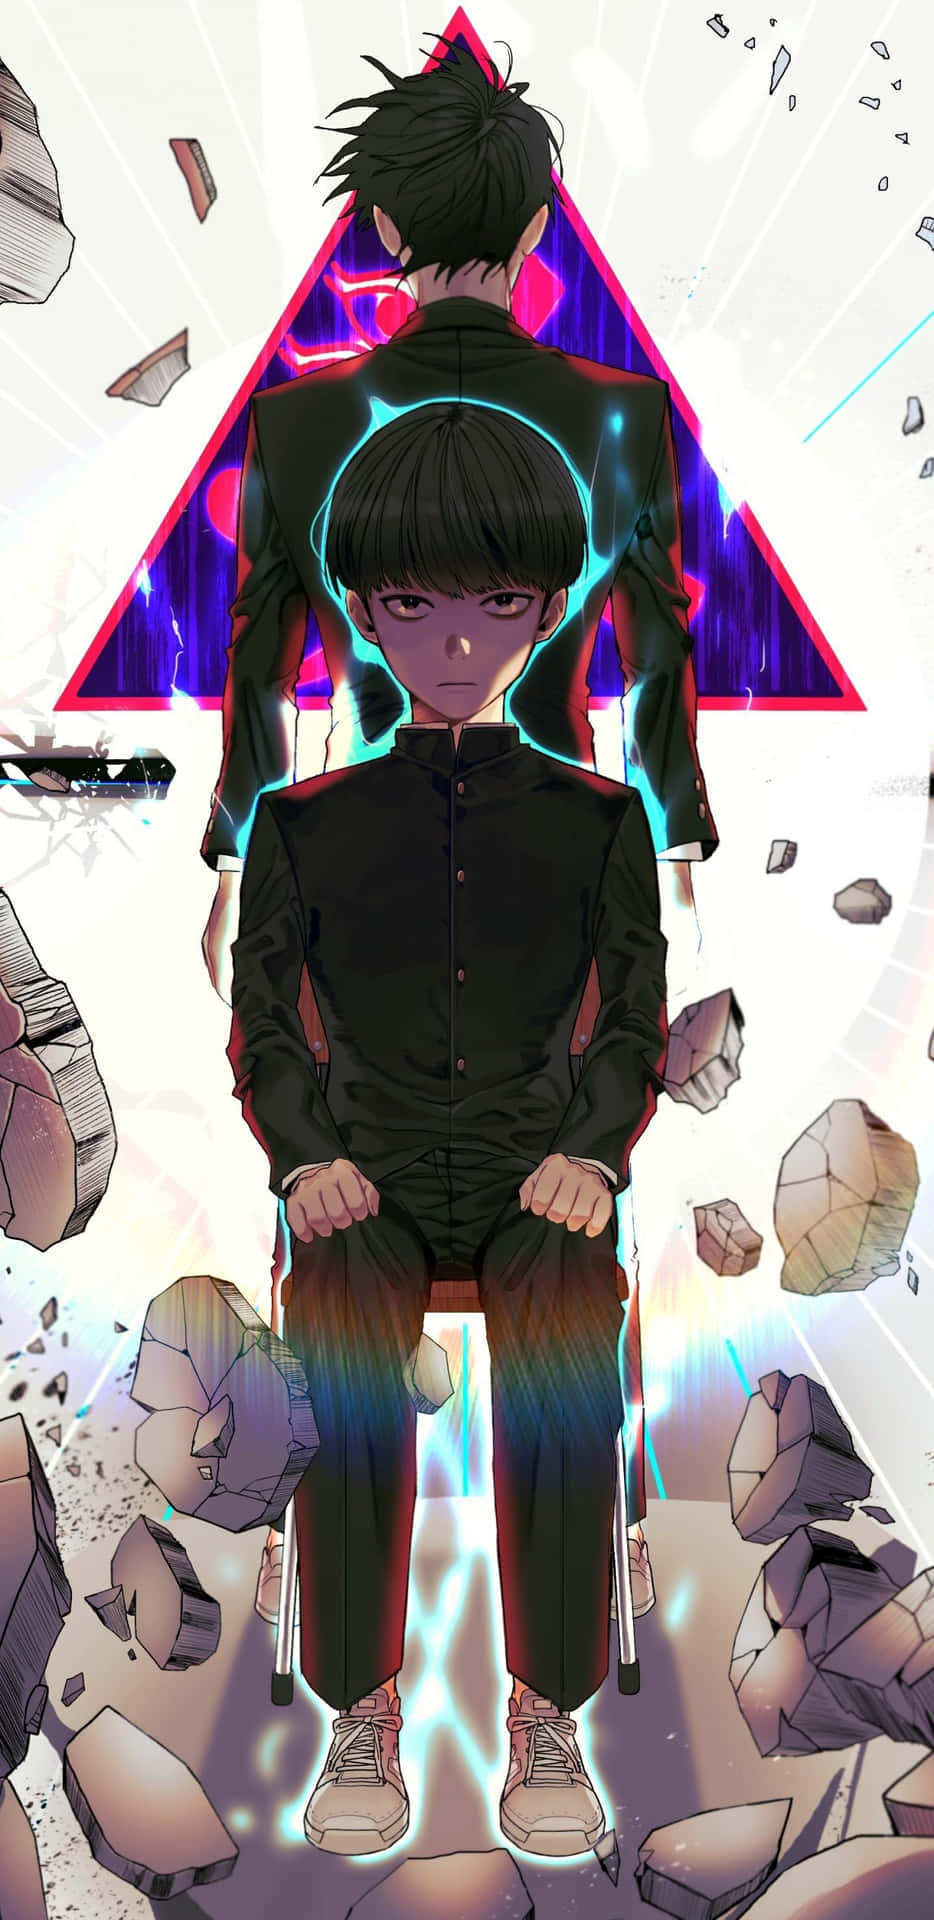 Shigeo Kageyama, also known as Mob, unleashing his psychic powers Wallpaper